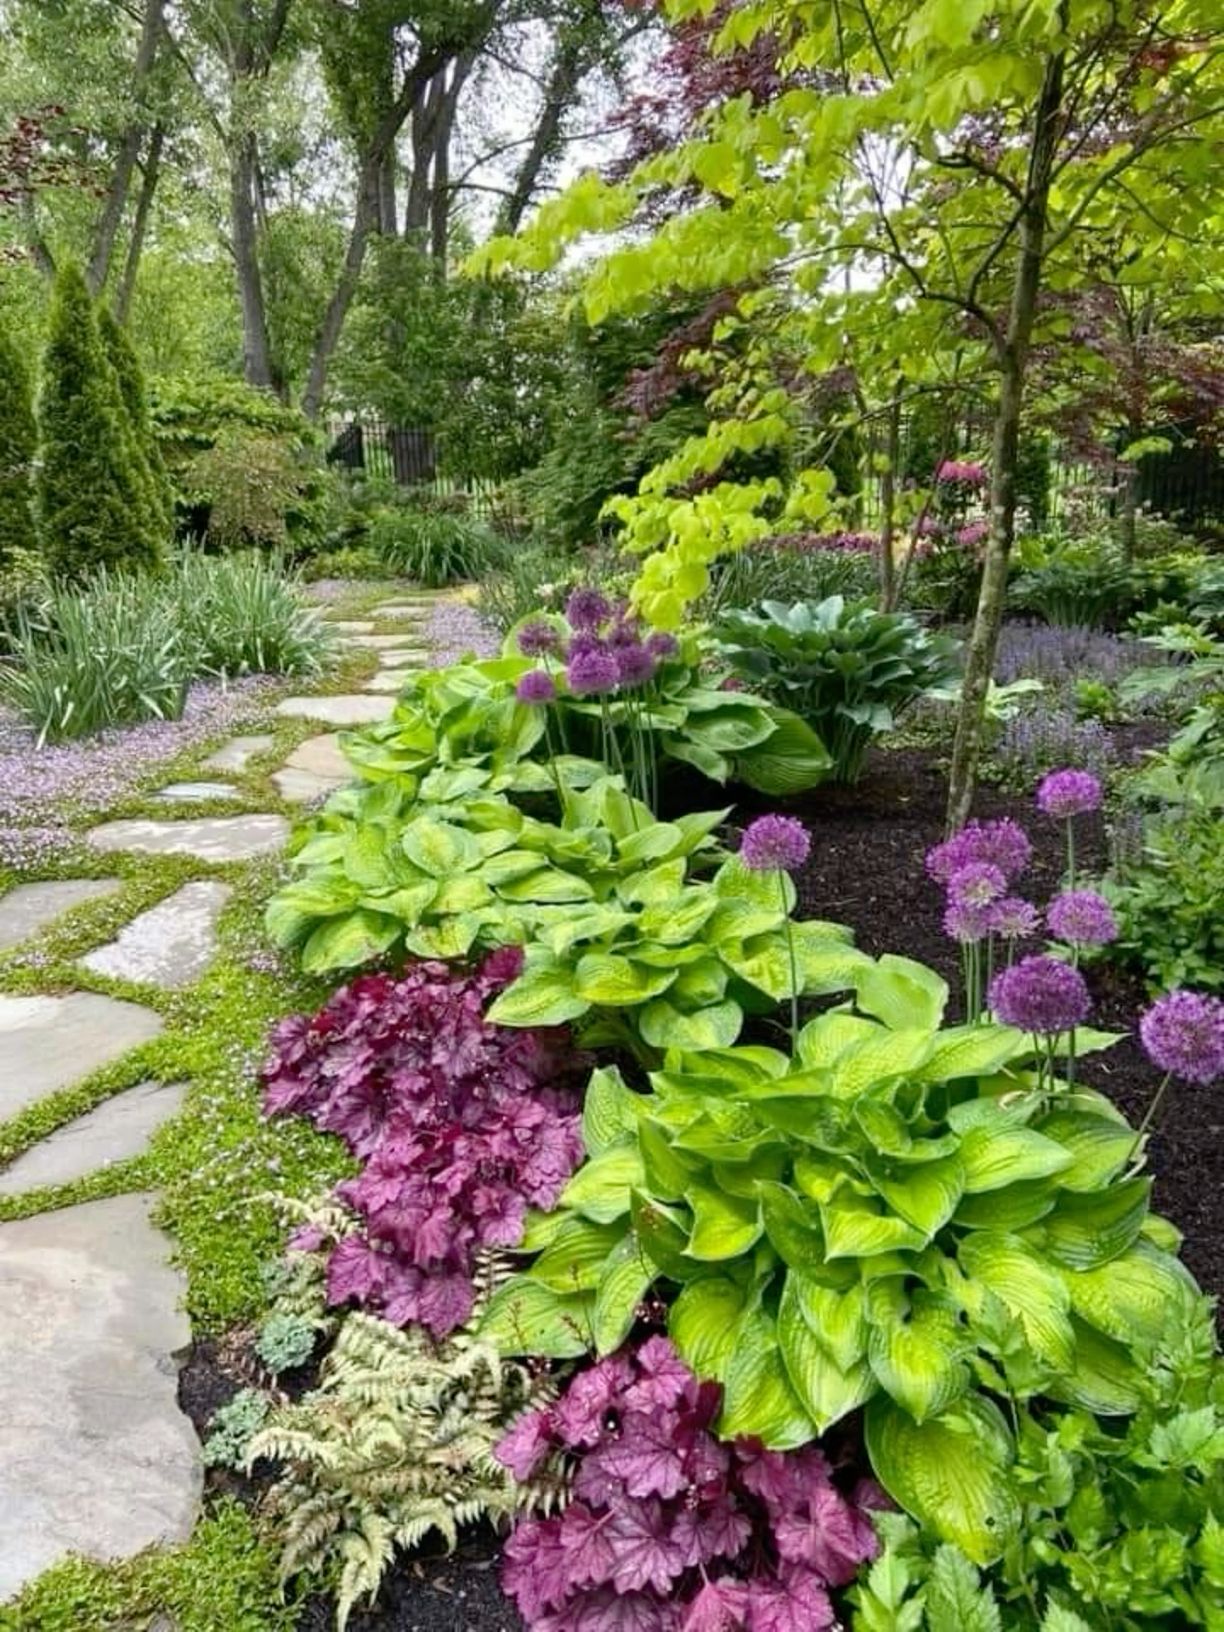 Transforming Your Outdoor Space: Tips for
Creating a Stunning Garden Landscape